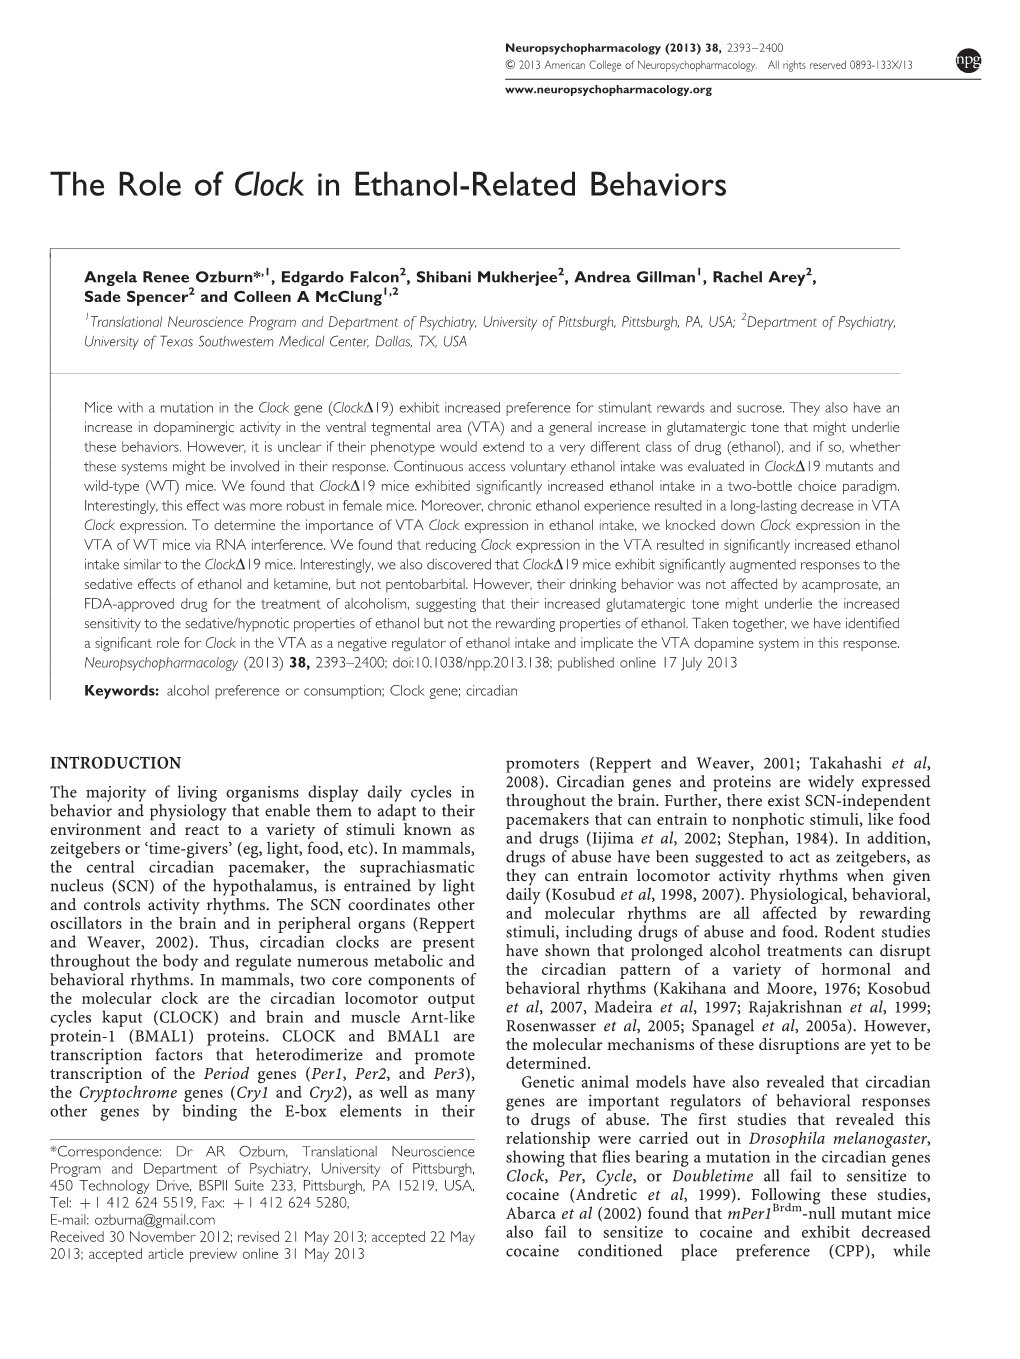 The Role of Clock in Ethanol-Related Behaviors